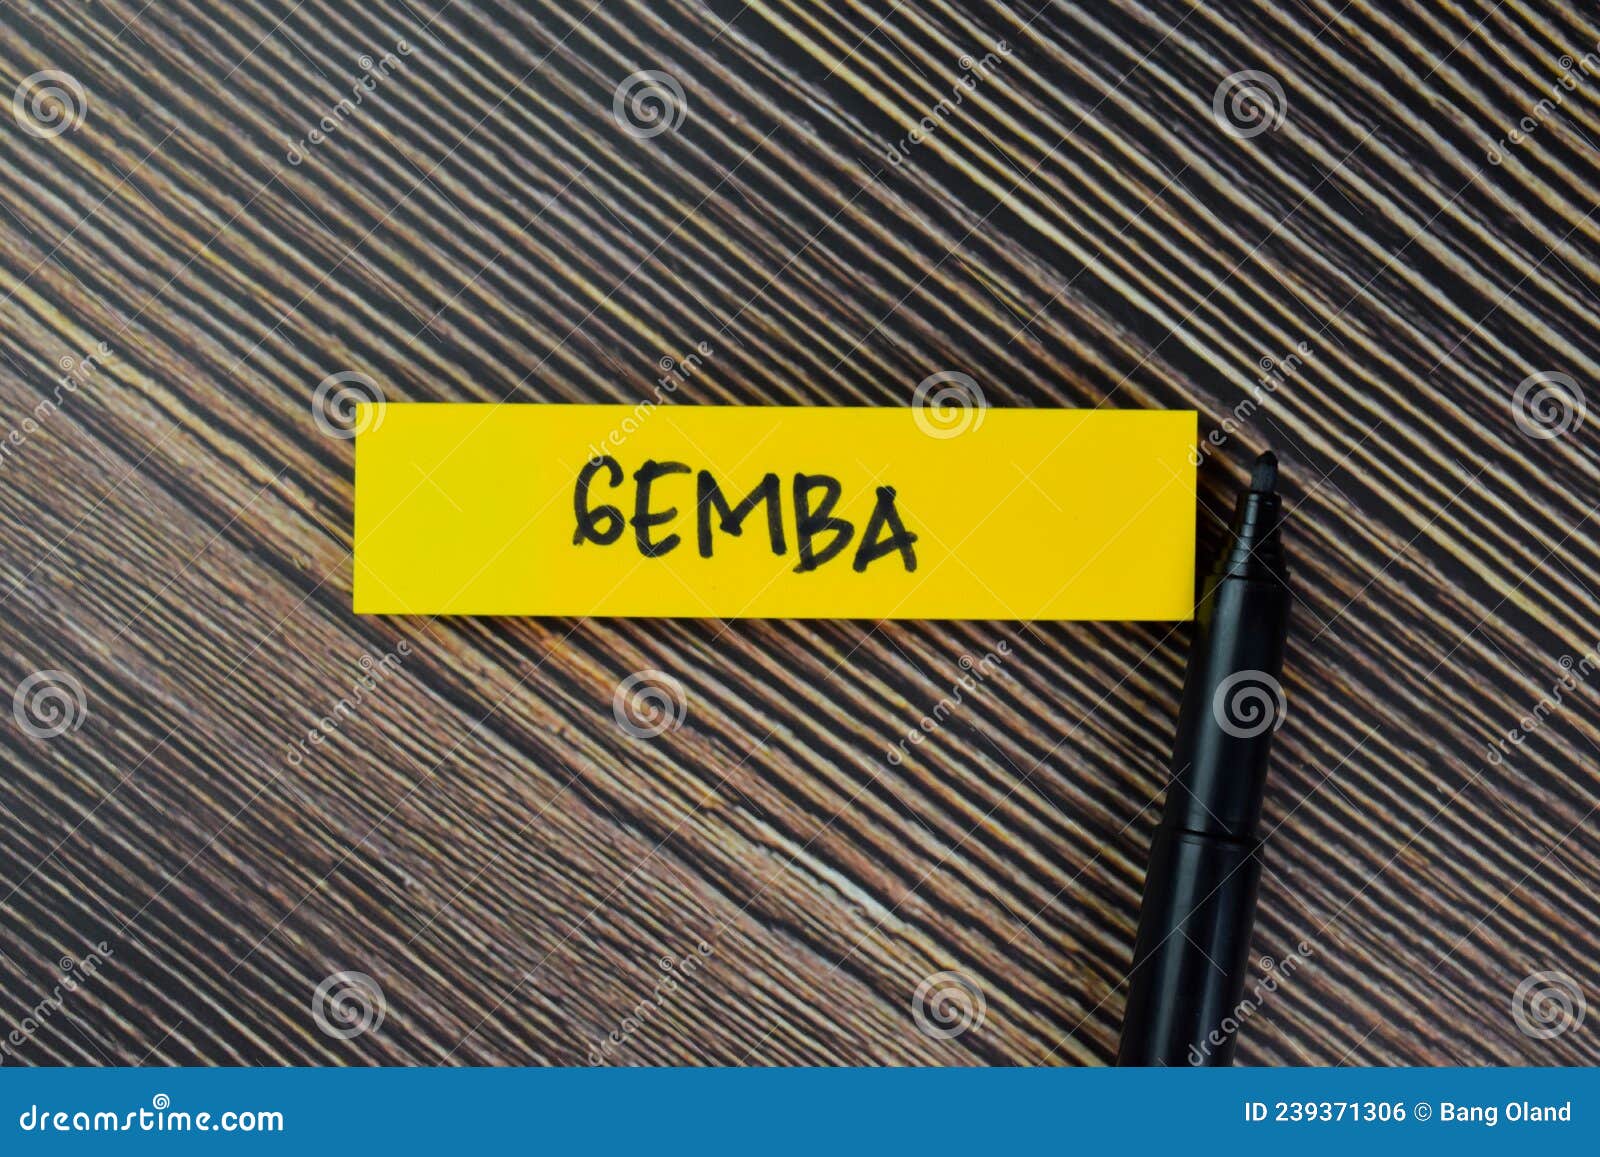 gemba write on sticky notes  on wooden table